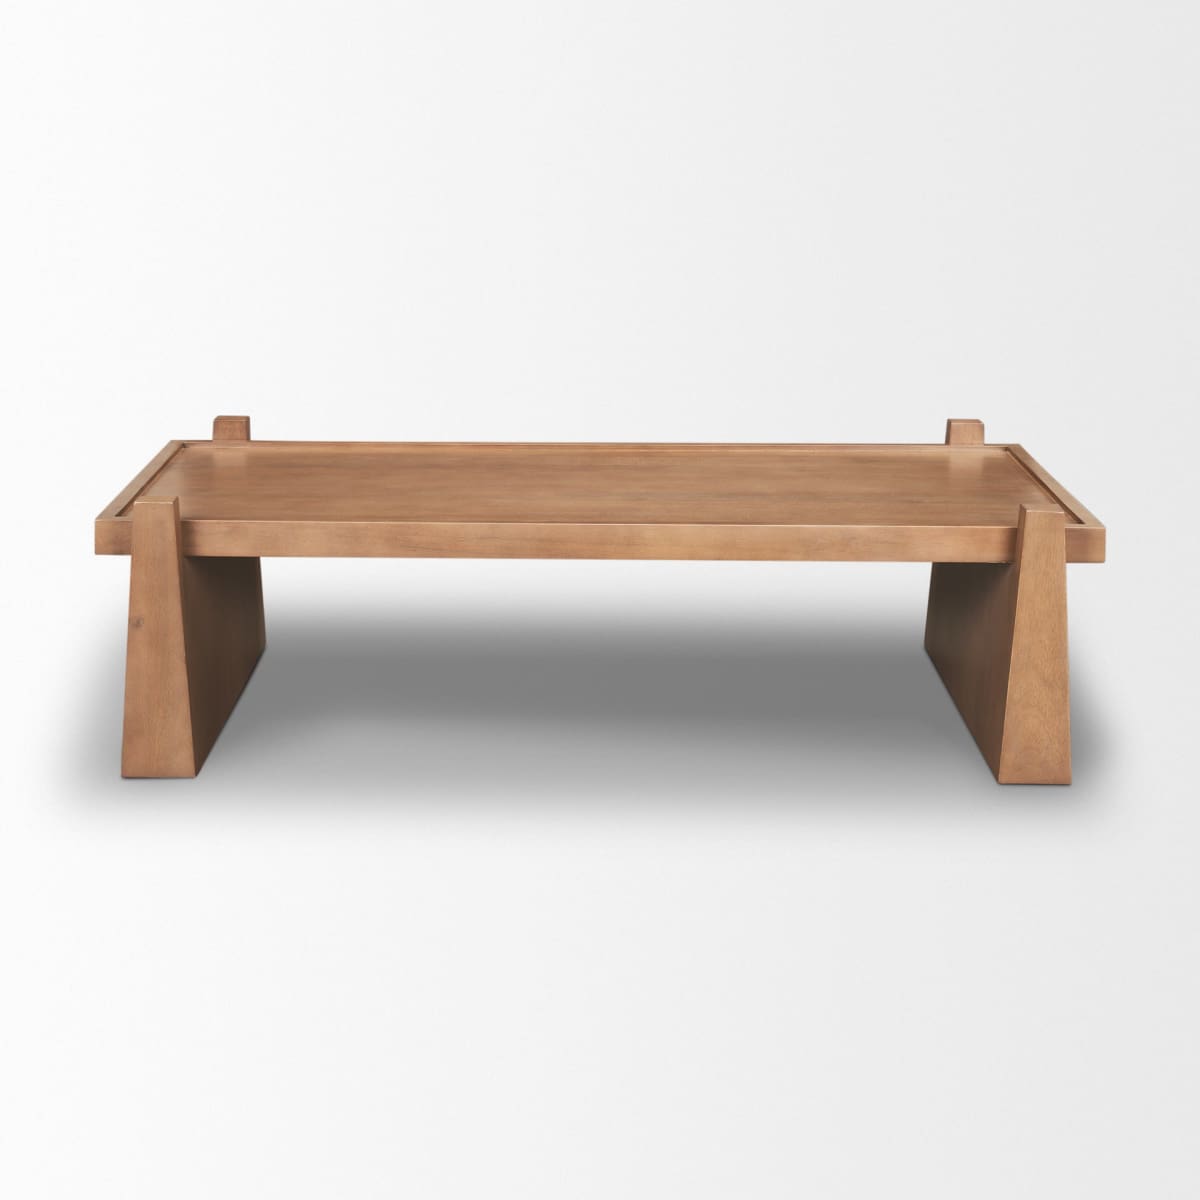 Eula Coffee Table Brown Wood - coffee-tables